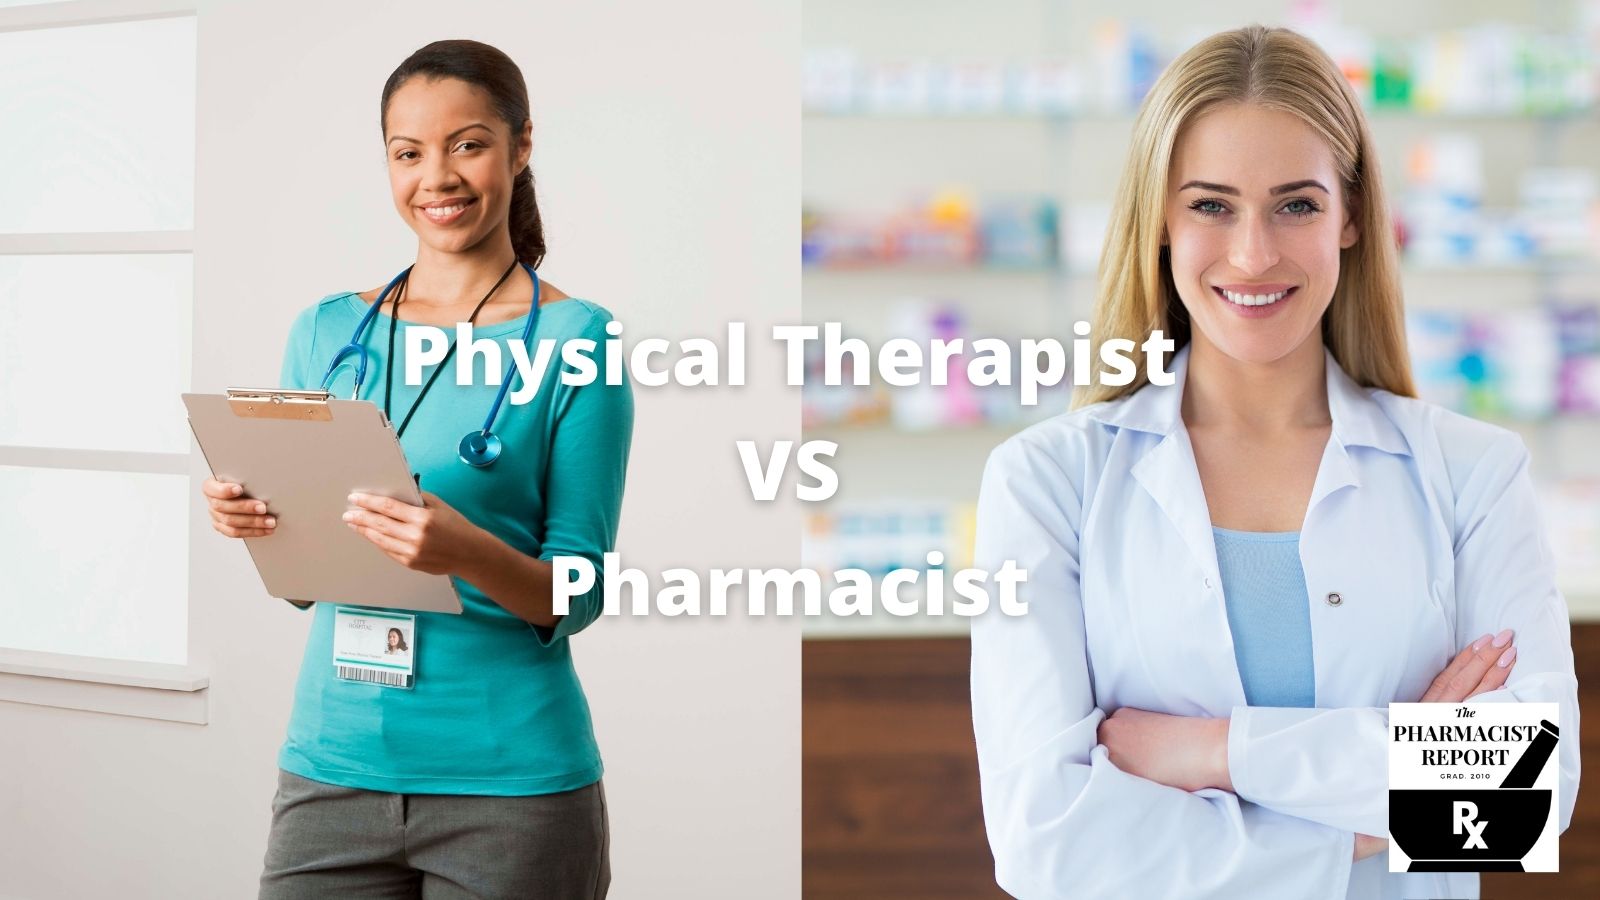 Is physiotherapist better than pharmacist?